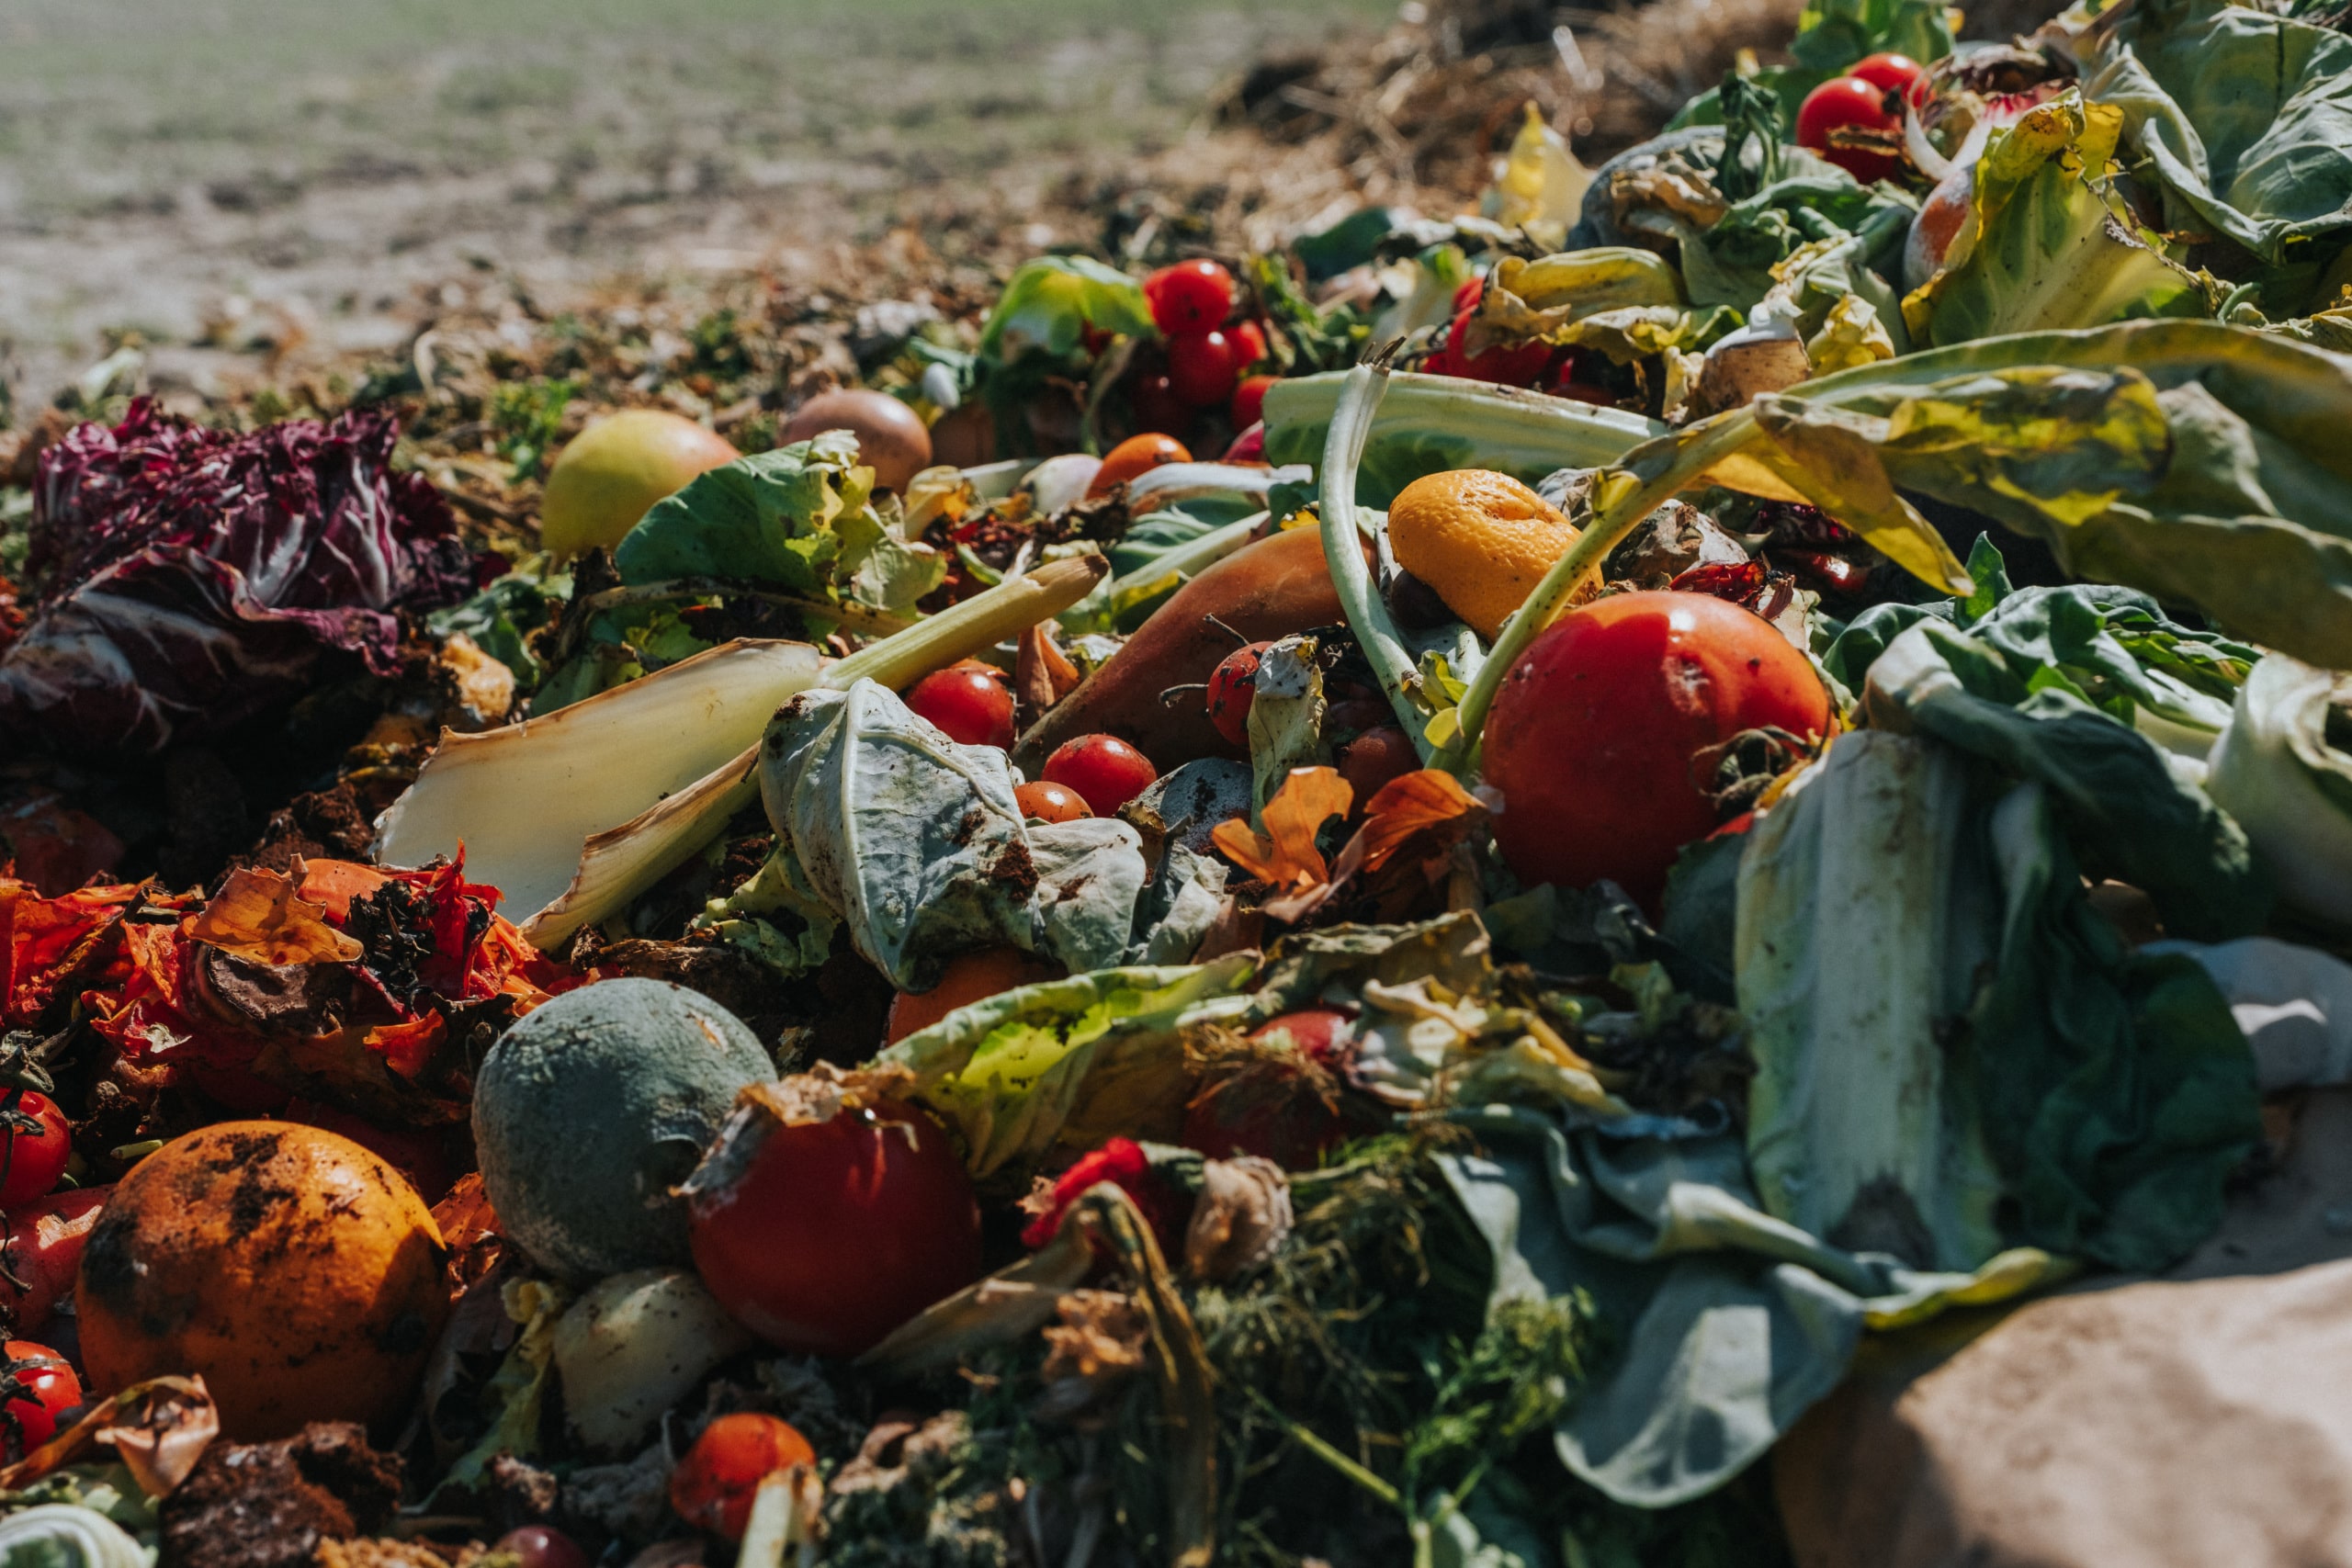 Food Waste Challenge - Foundation for Food & Agriculture Research